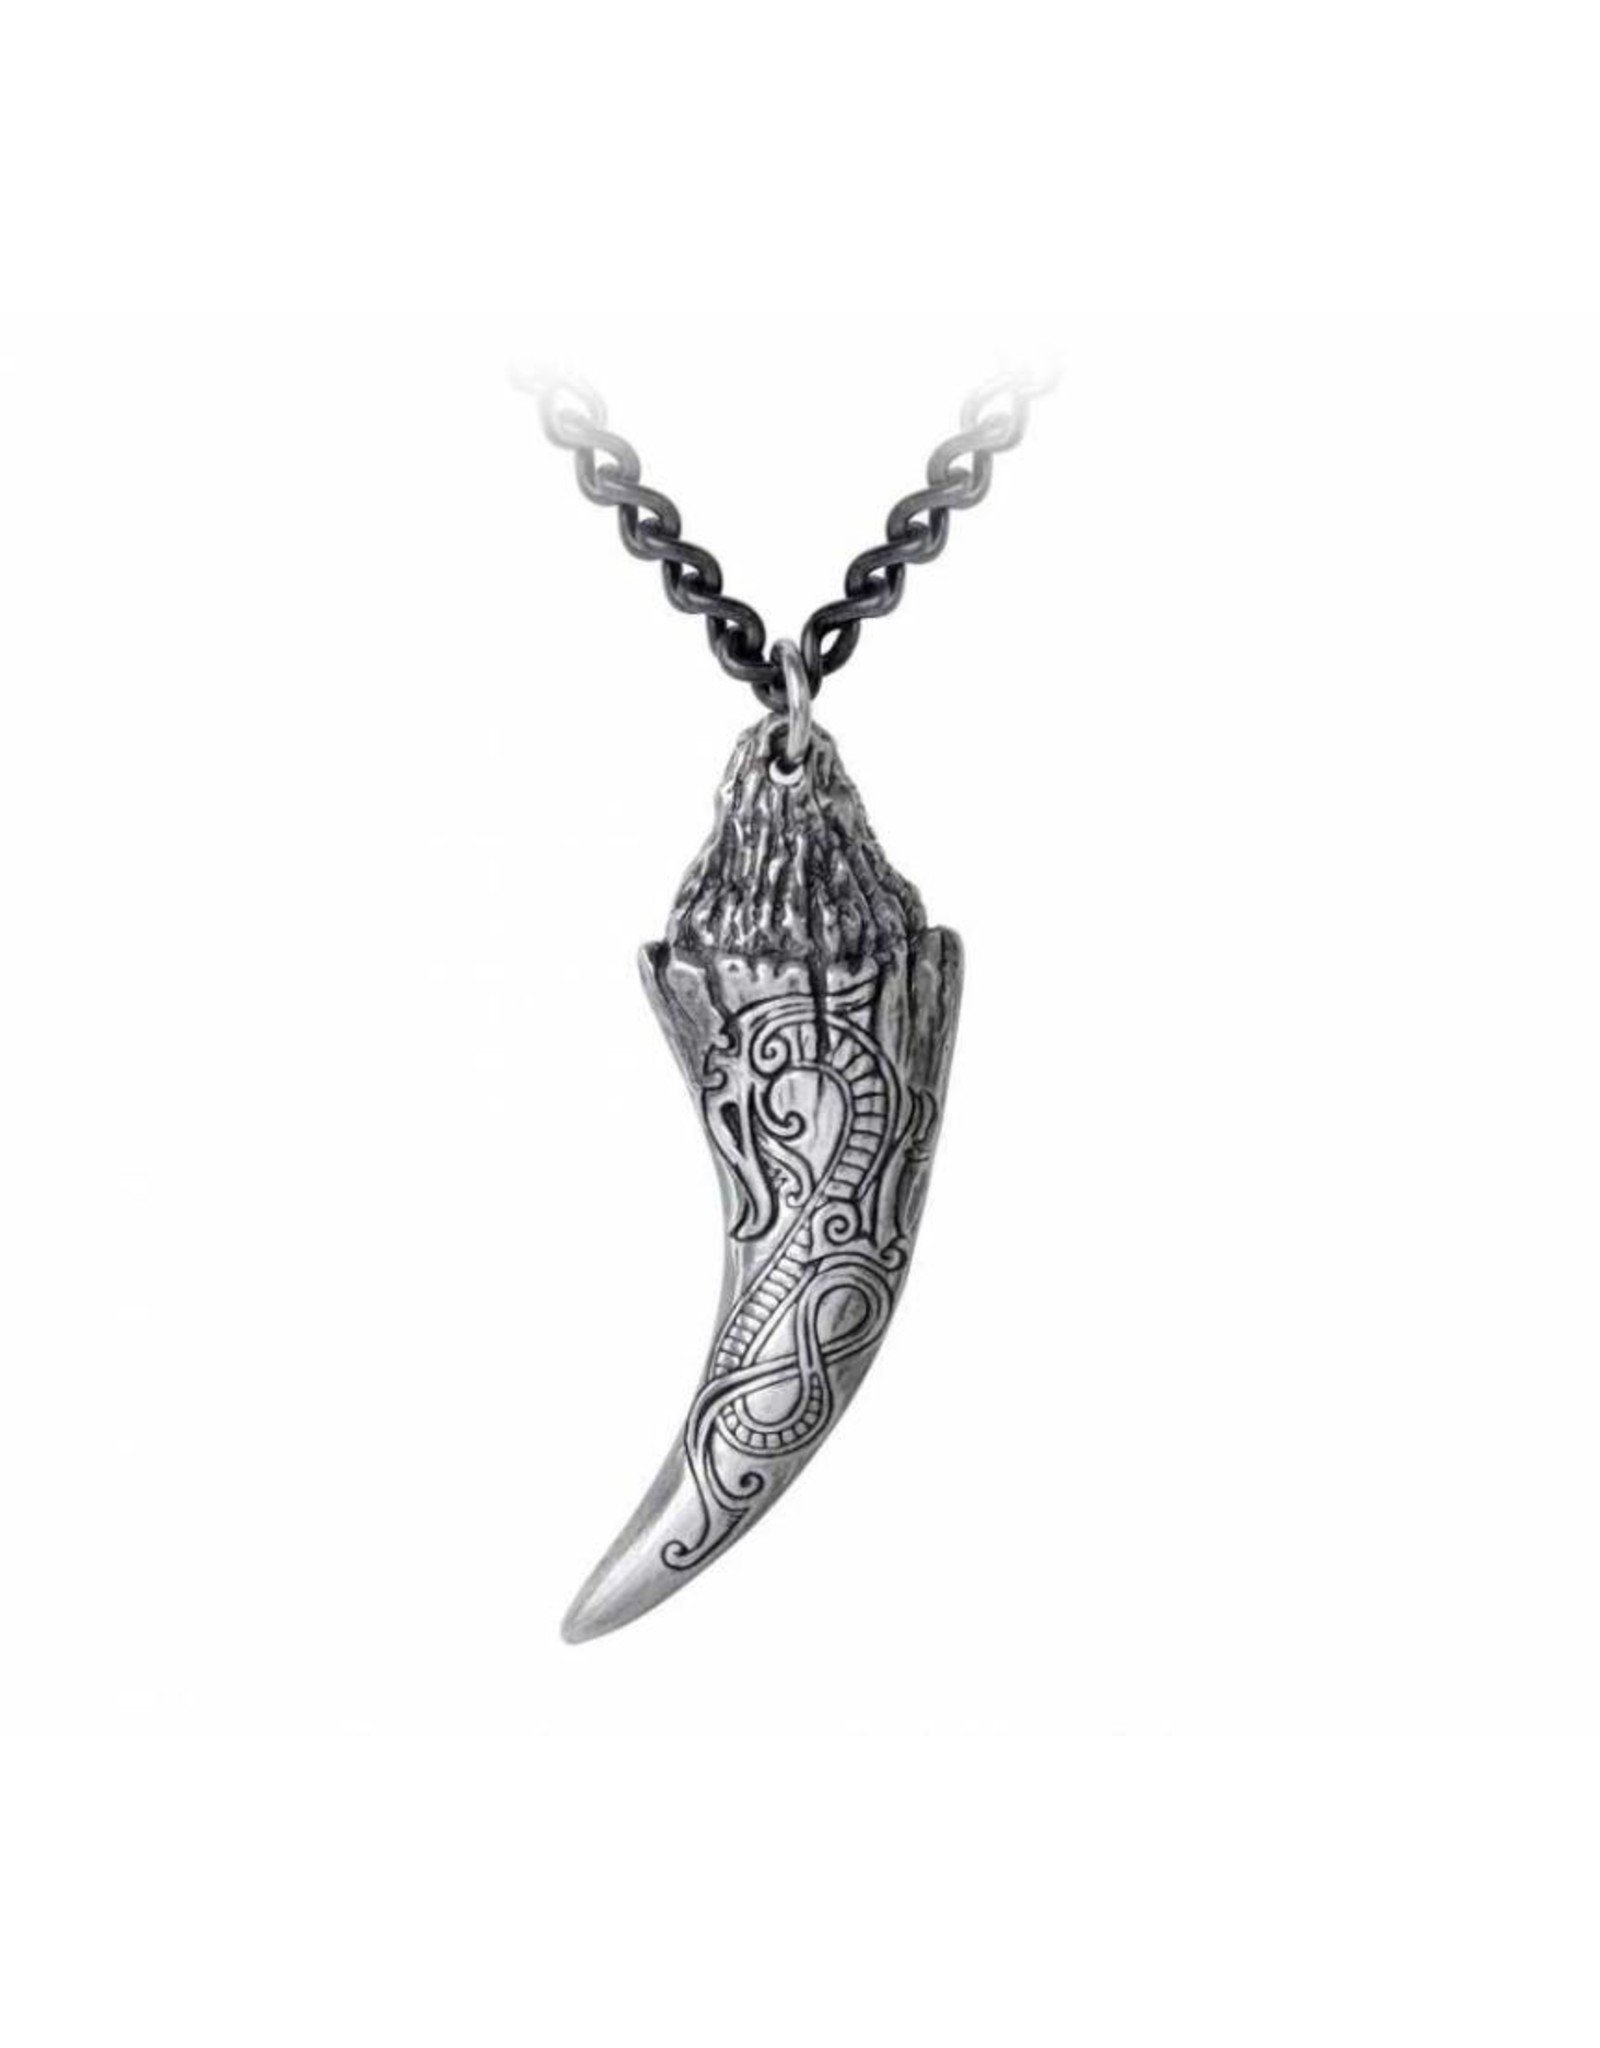 Alchemy Celtic,- Viking,- Gothic accessories - Frodas Dragon Tooth Alchemy pendand en necklace